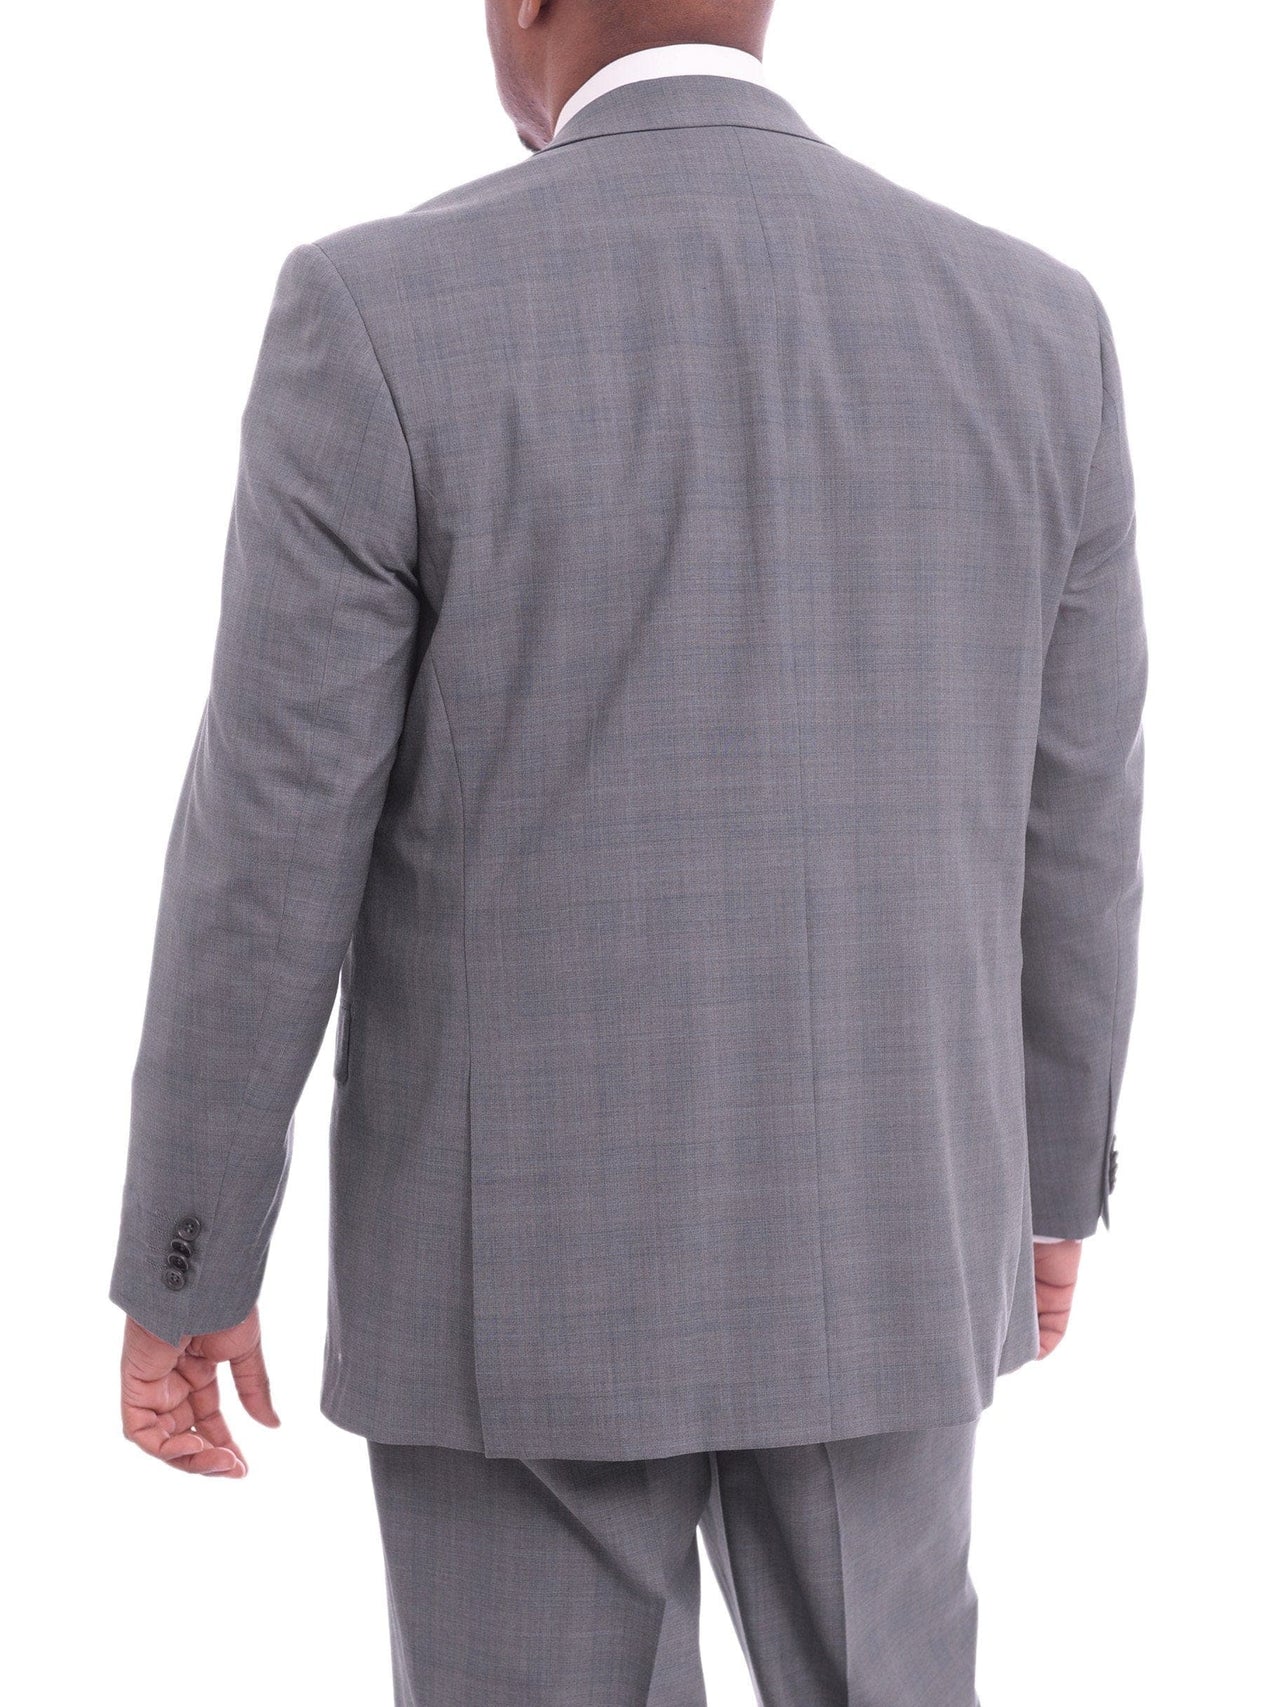 Prontomoda TWO PIECE SUITS Prontomoda Classic Fit Light Heather Blue With Subtle Plaid Two Button Wool Suit